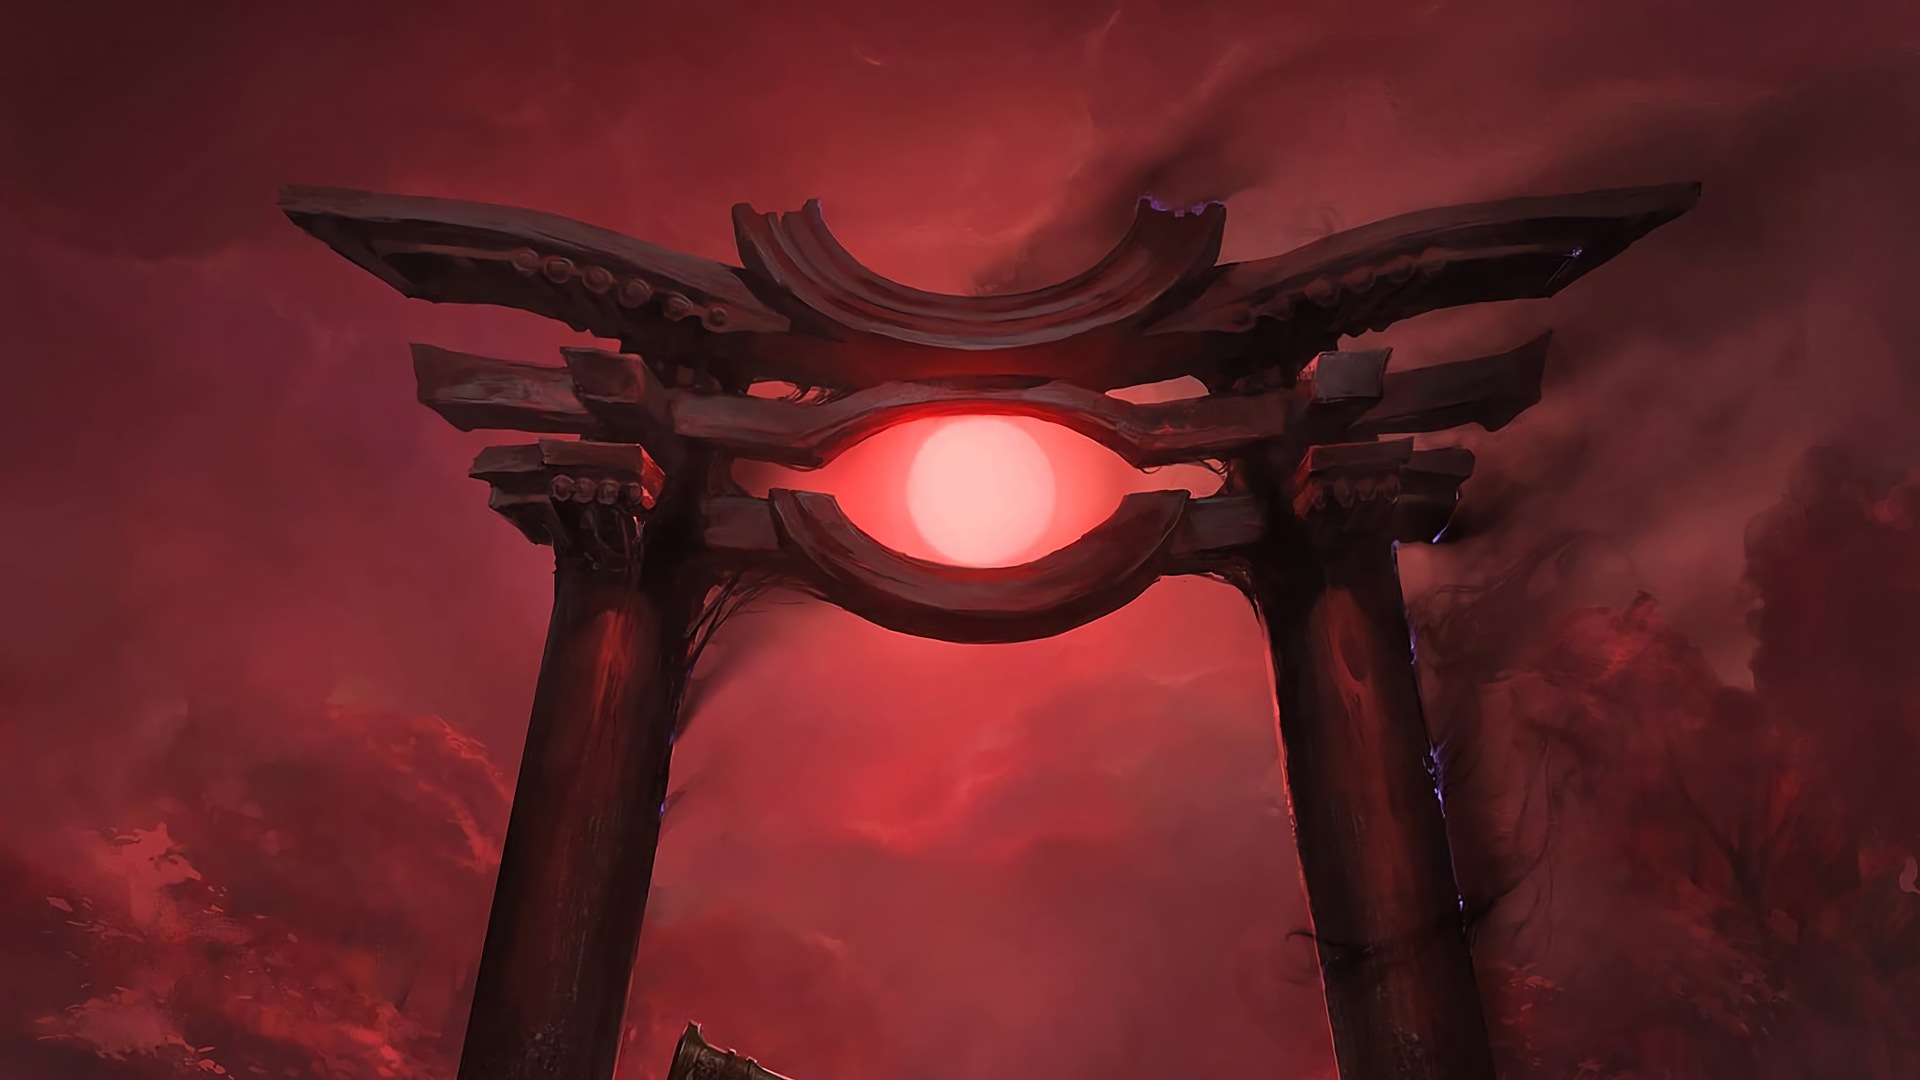 mtg blood moon, red moon backgrounds